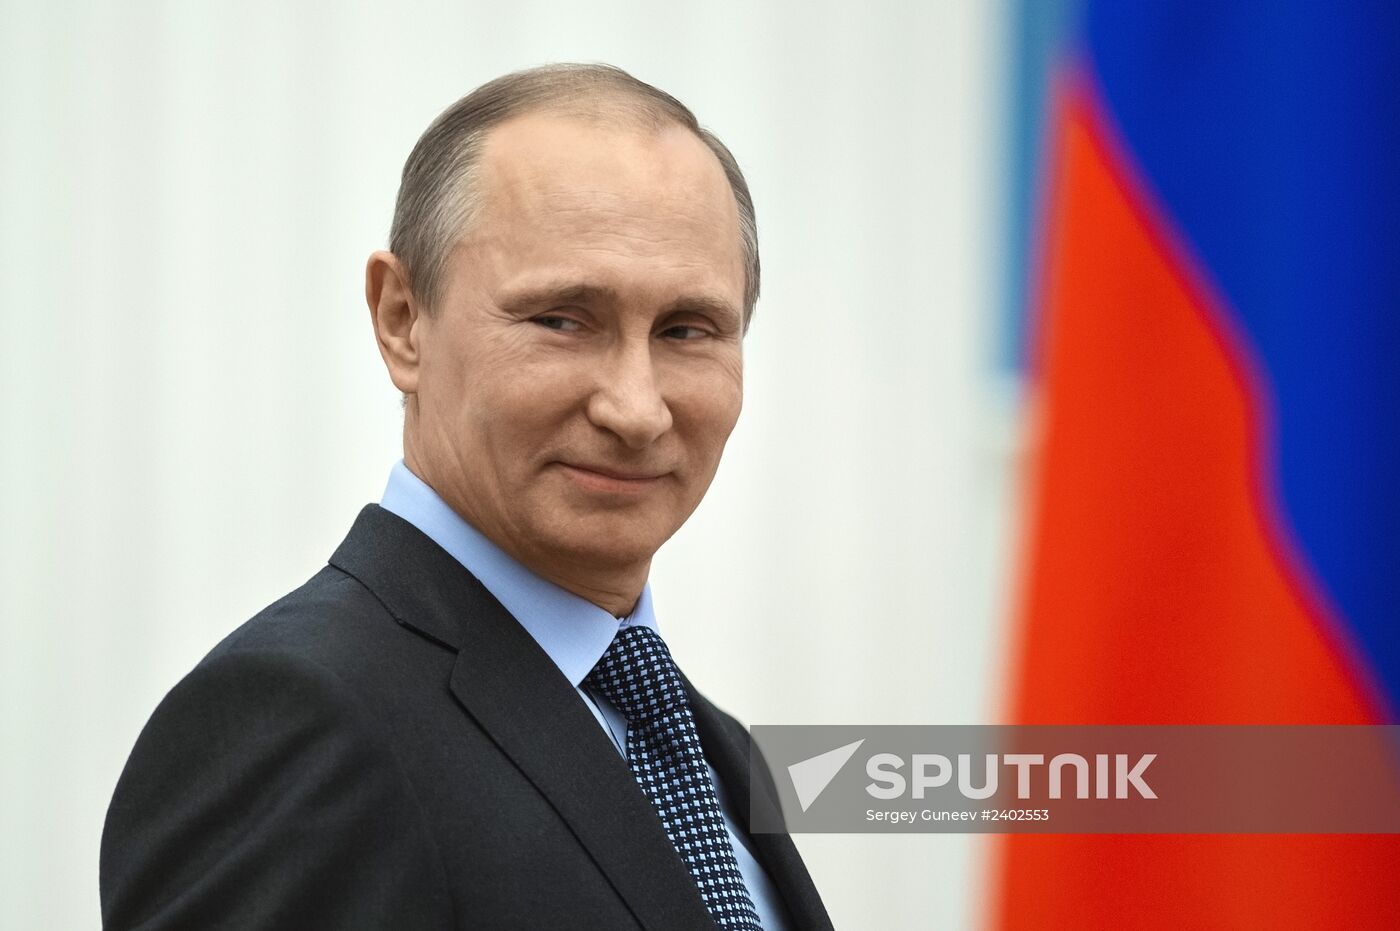 Vladimir Putin presents awards to workers of culture